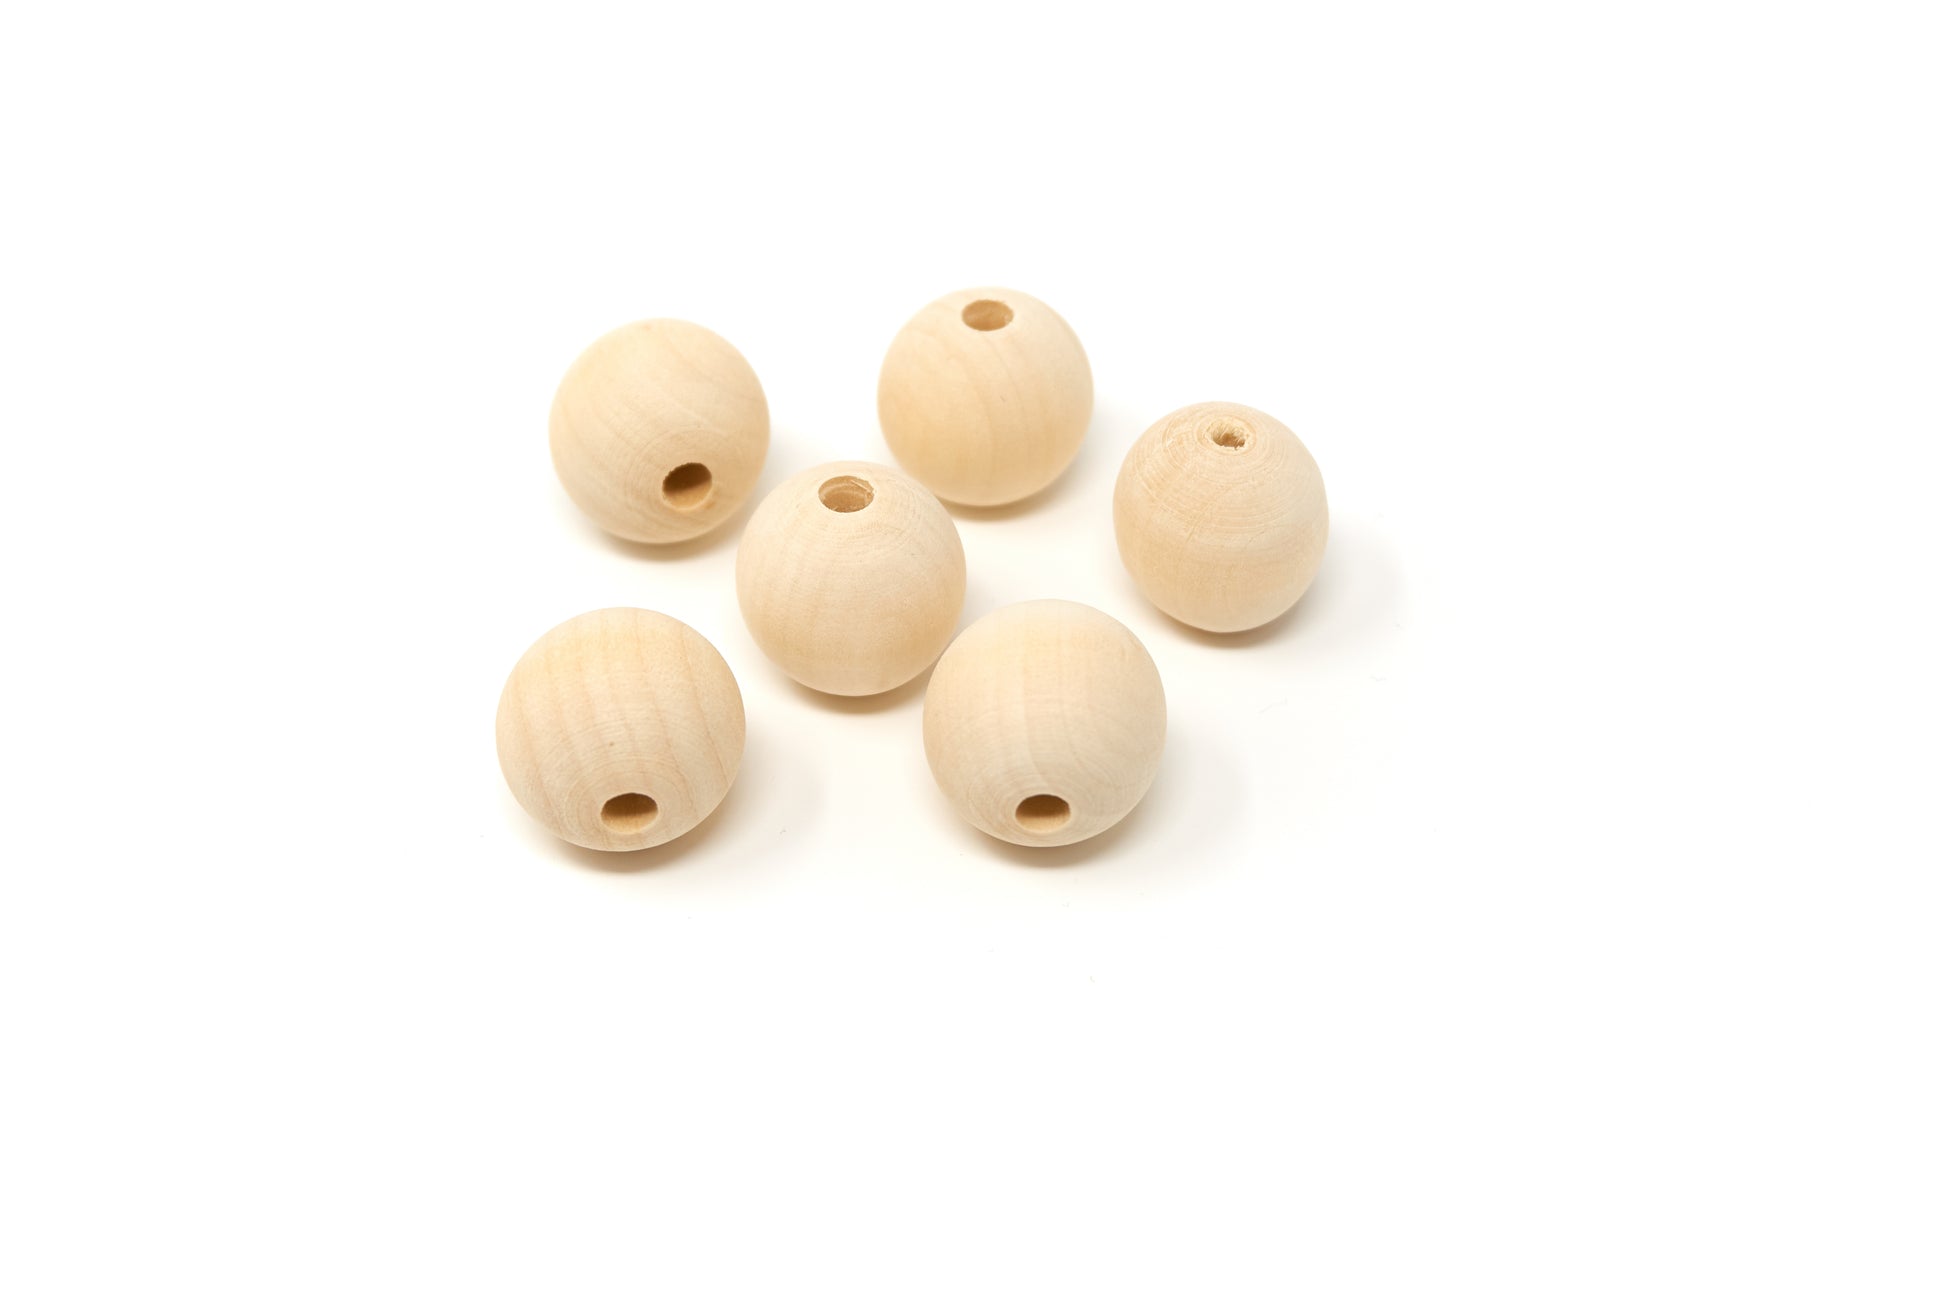 Natural Round Wood Beads 18mm 100 pieces - Cameos Art Shop